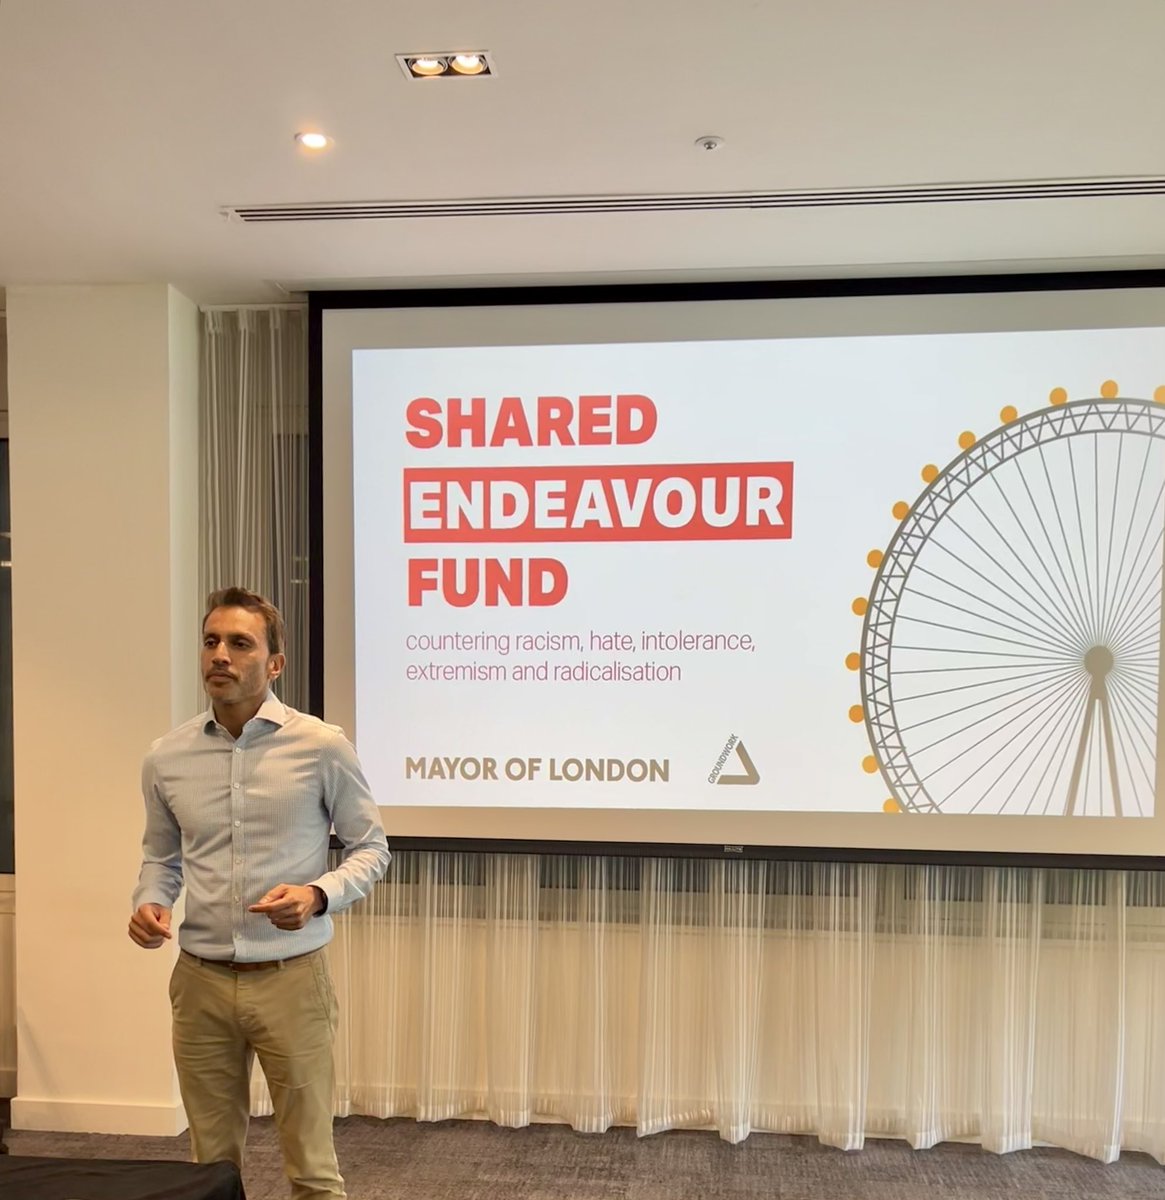 It was a privilege to be able to share the work we are doing to combat #hate and #intolerance at the @MayorofLondon #SharedEndeavourFund conference today. So inspiring to meet some of the other amazing organisations doing much needed work in this area
@MOPACLdn #youthwork